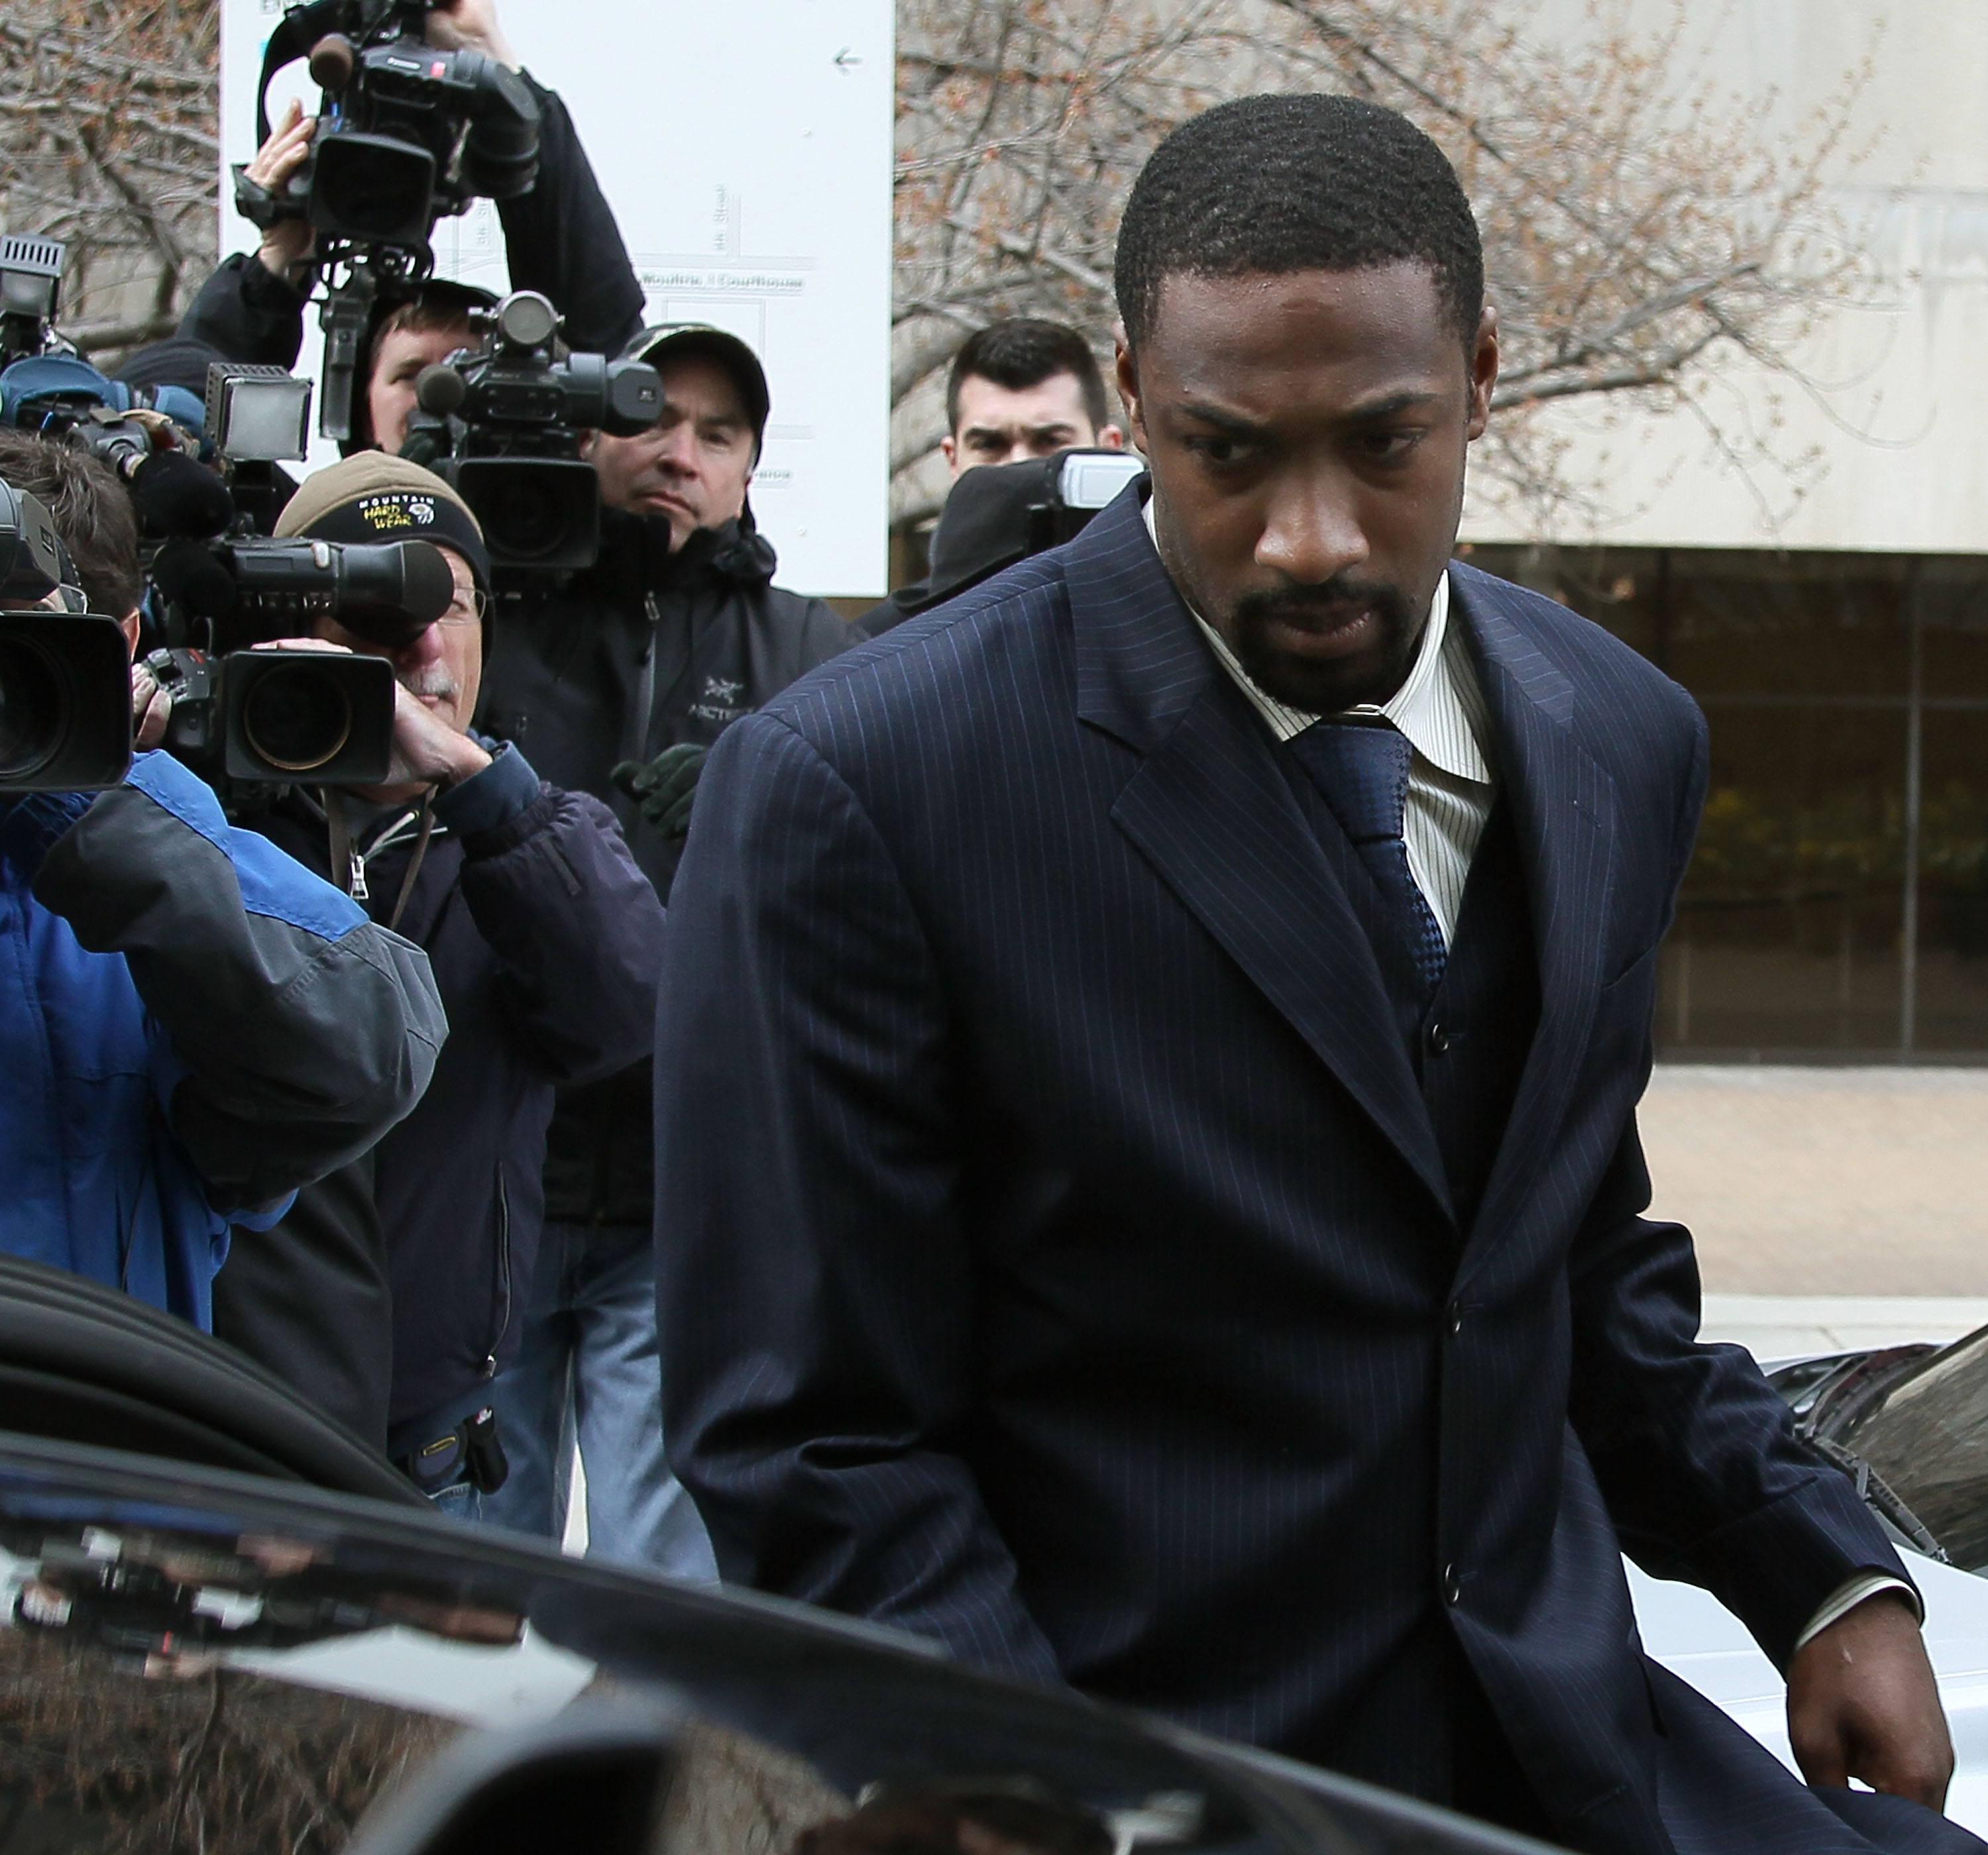 WASHINGTON - MARCH 26:  NBA player Gilbert Arenas of the Washington Wizards leaves the District of Columbia Court after being sentenced March 26, 2010 in Washington, DC. The Washington Wizards star recieved two years probation for bringing guns into the W